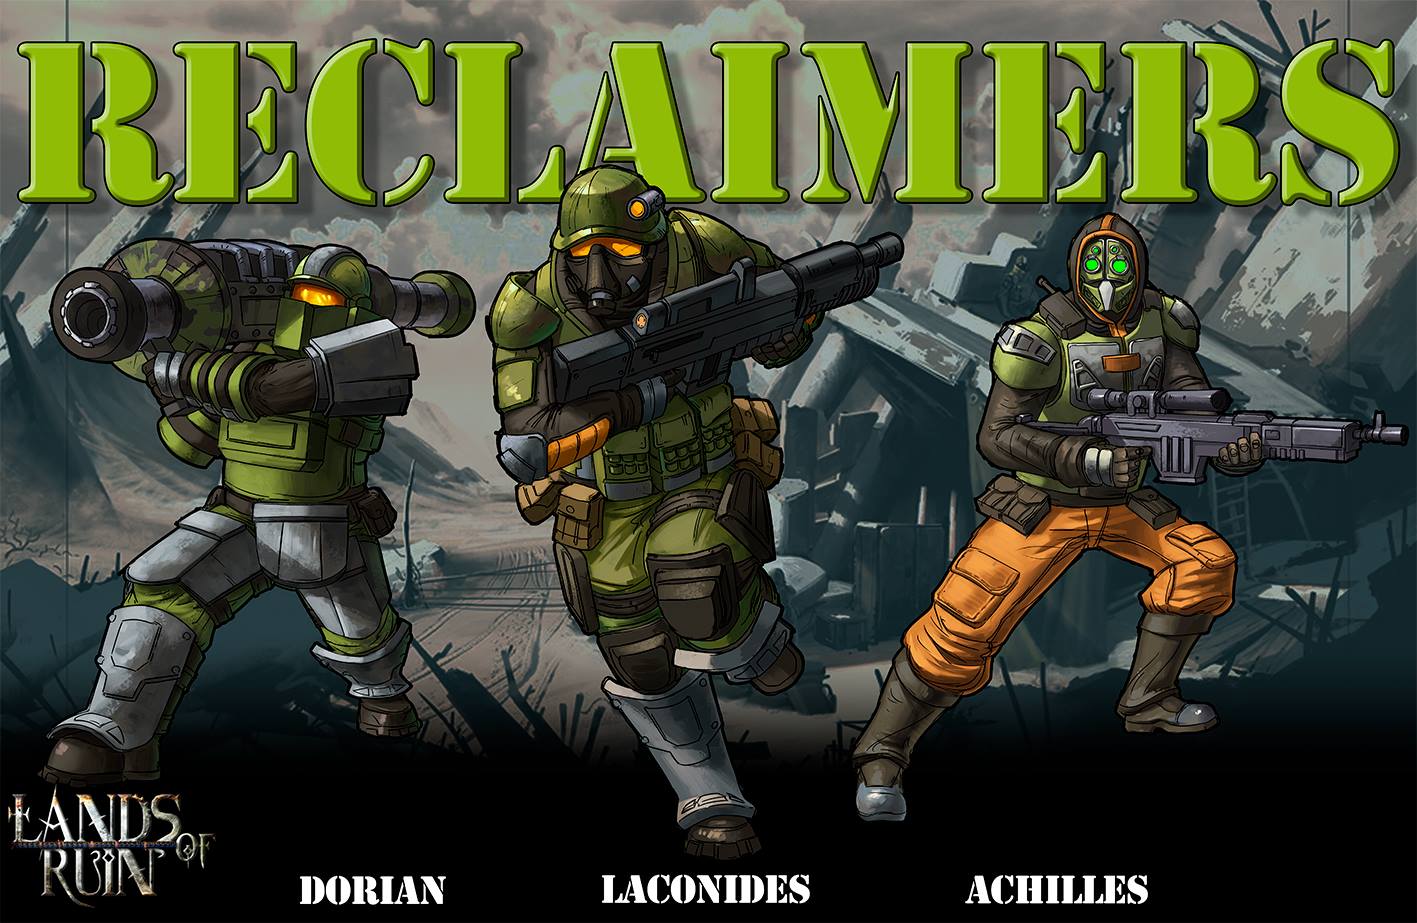 poster_reclaimers